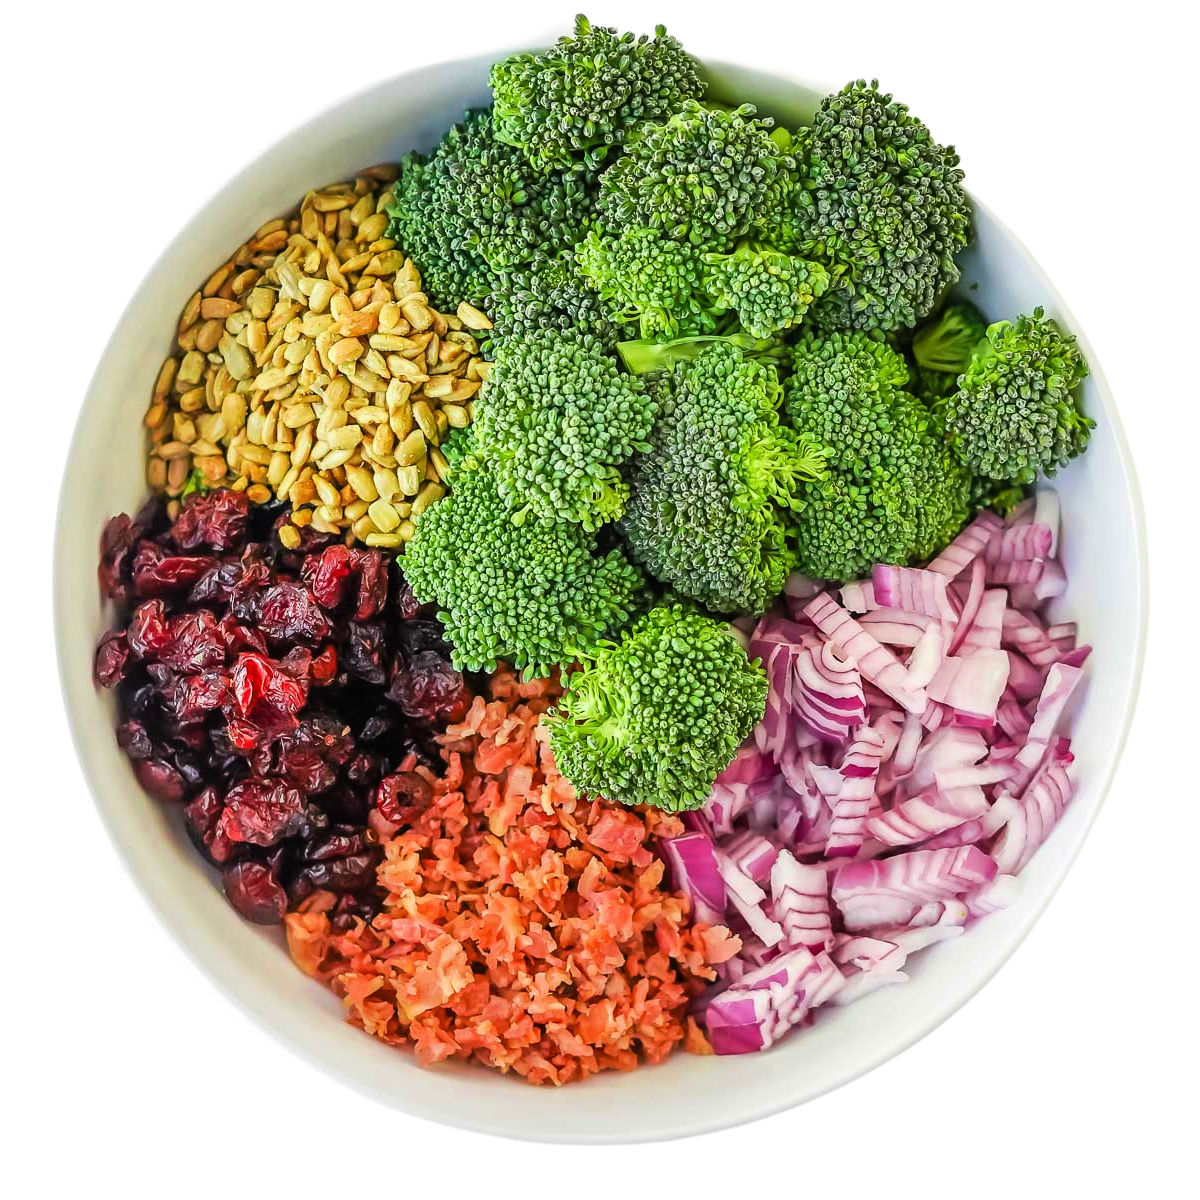 white bowl with broccoli salad ingredients in it ready to be mixed together.